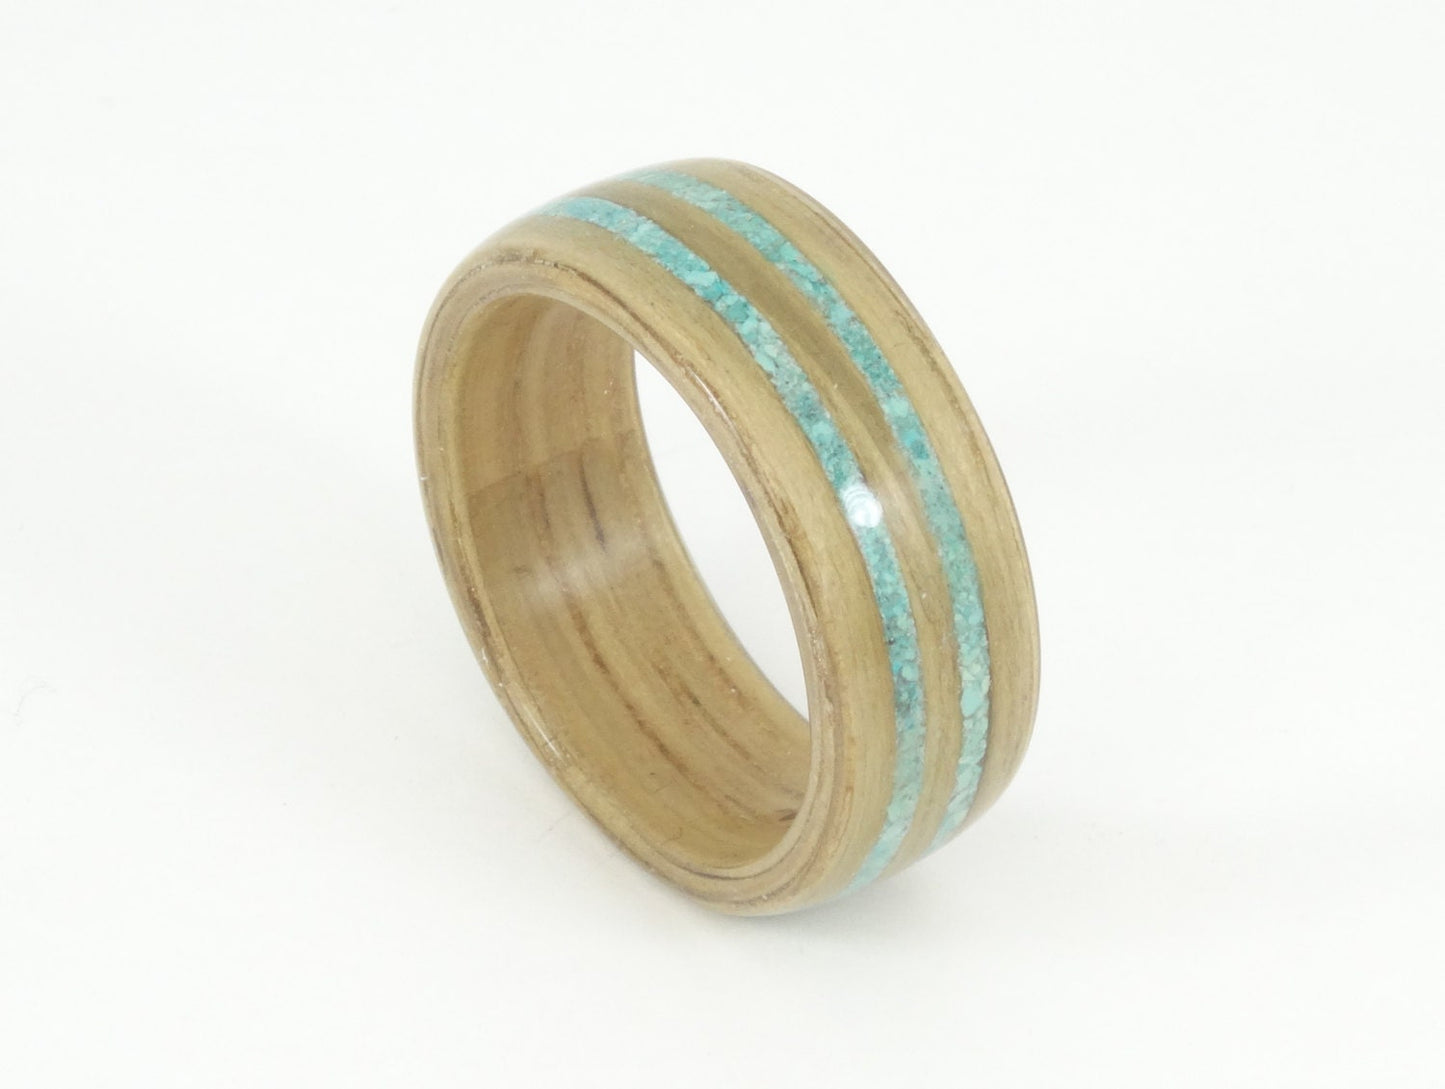 Oak with Double Turquoise Inlay Bent Wood Ring